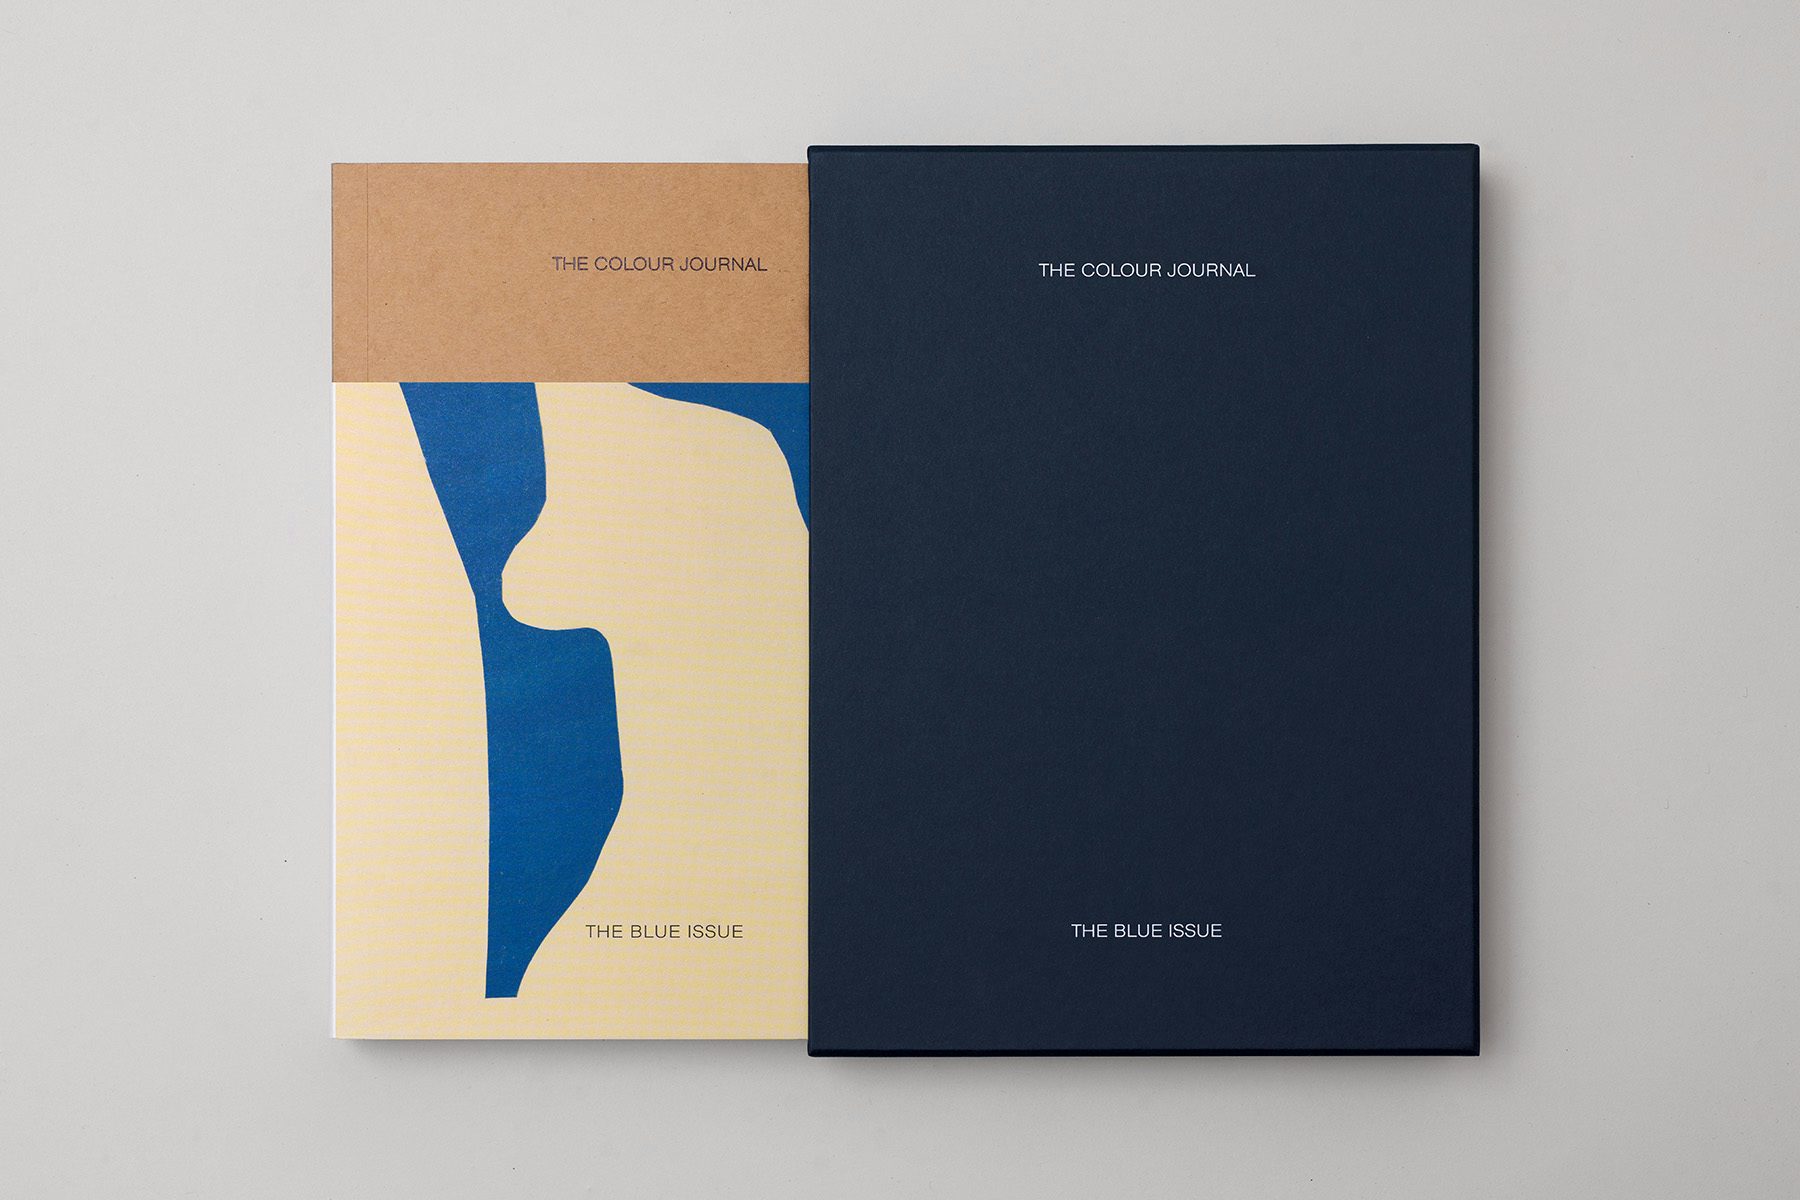 Flat lay photograph of the Blue issue of The Colour Journal, which features an abstract blue and beige cover design, jutting out from a navy blue slip case